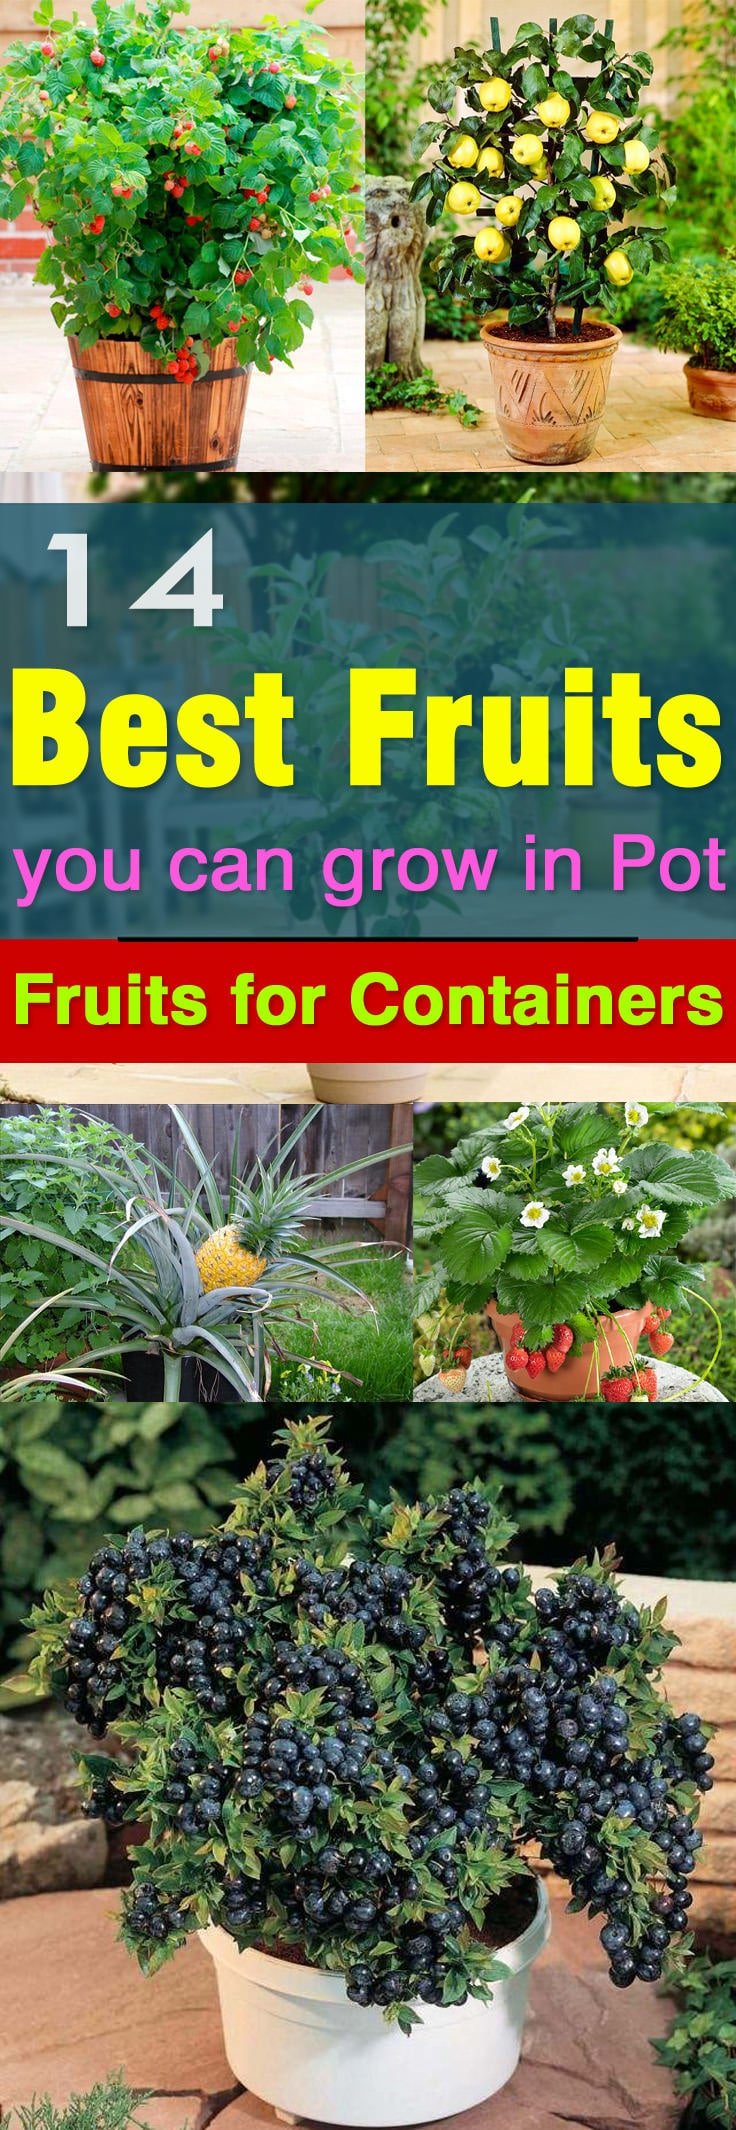 Not only the vegetables but fruits can be grown in pots too. Here are 14 best fruits to grow in containers.